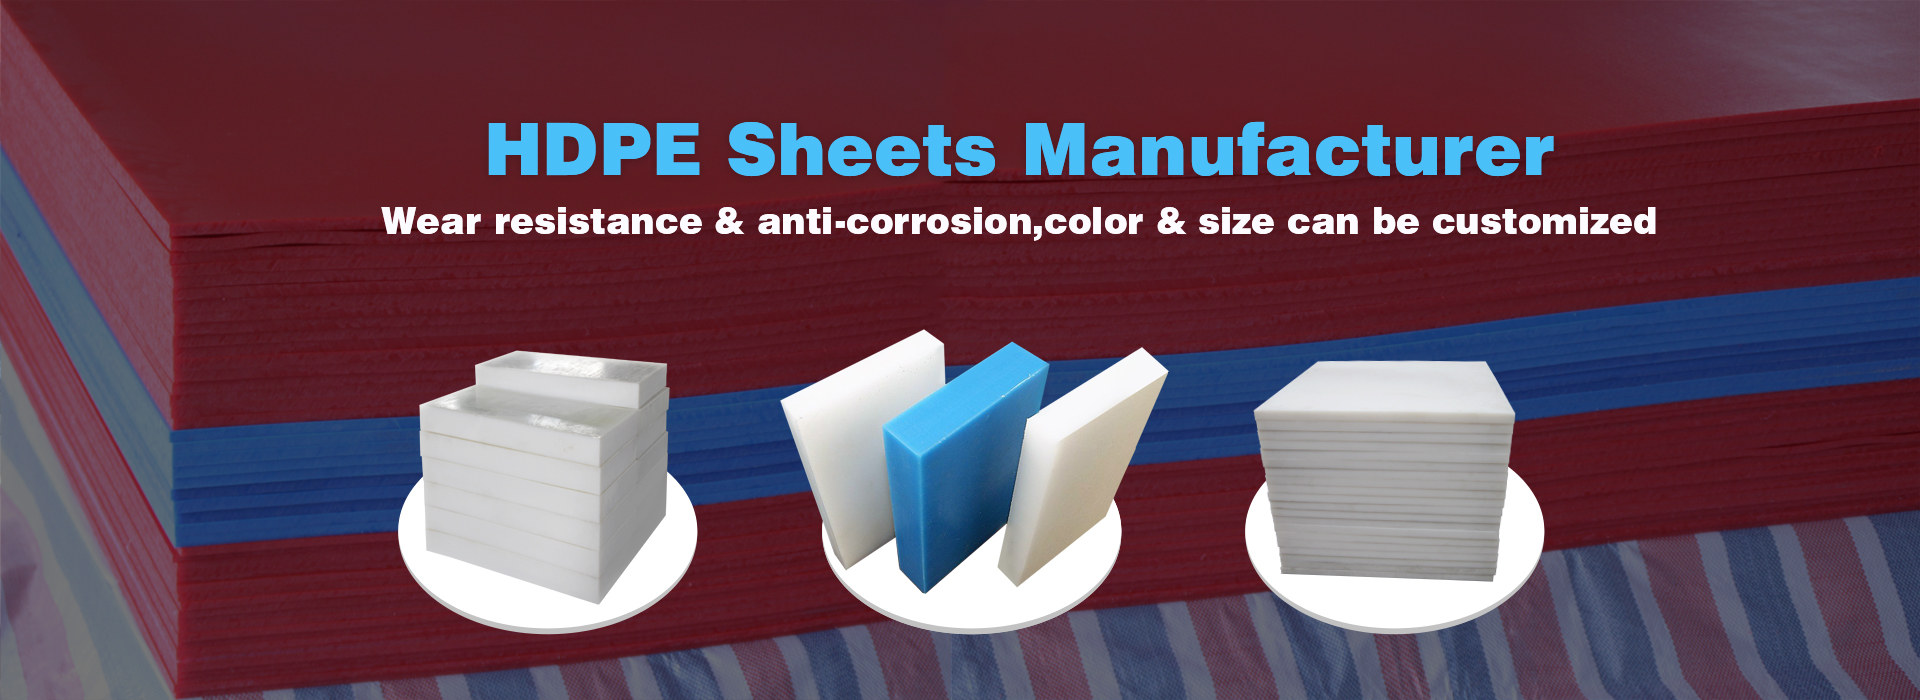 smooth hdpe 4 x 8 sheets